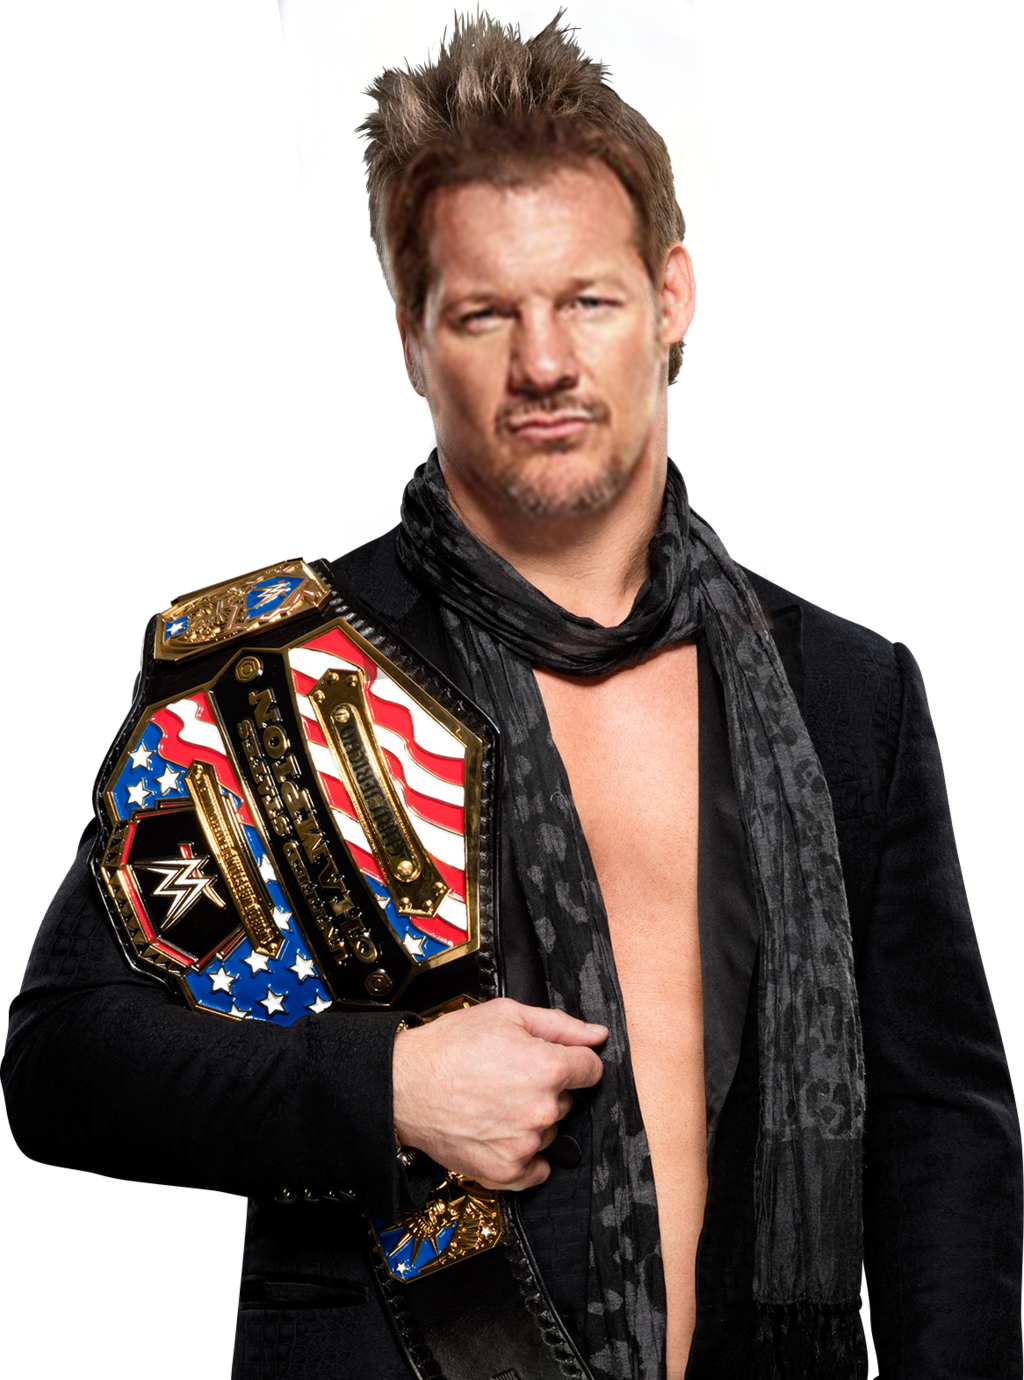 CHRIS JERICHO UNITED STATES CHAMPION PNG 2017 by Antonixo02 on